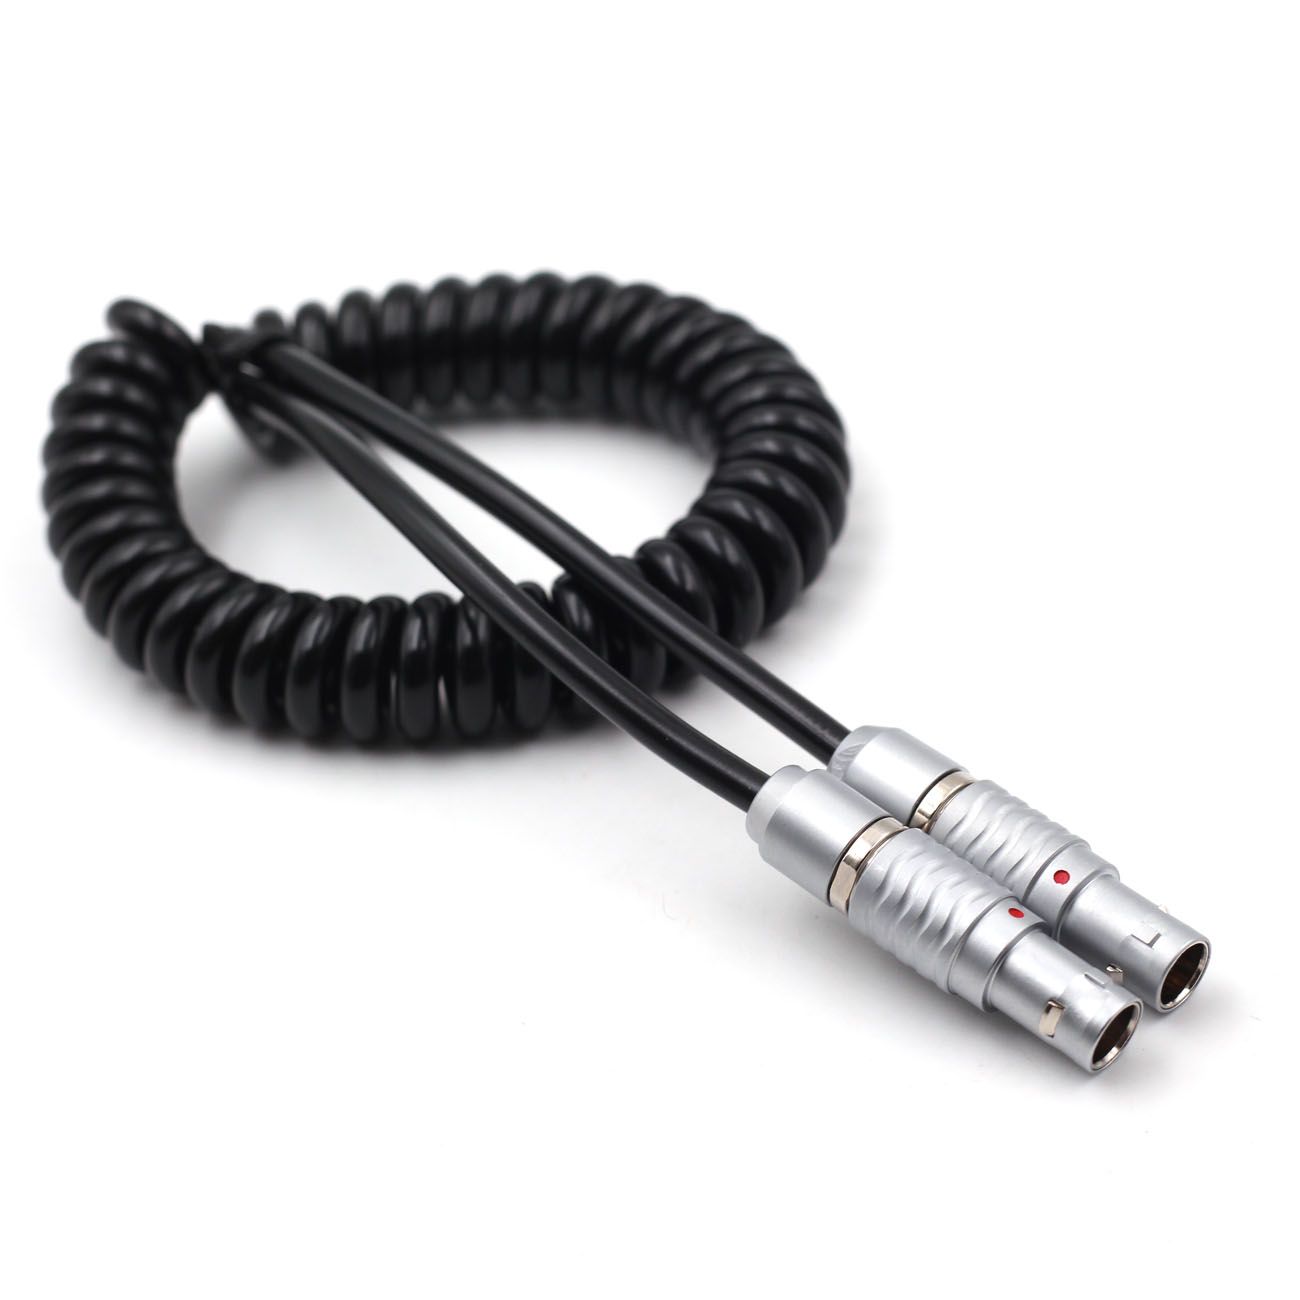 lemo 2pin to 2pin power spring cable for Arri camera